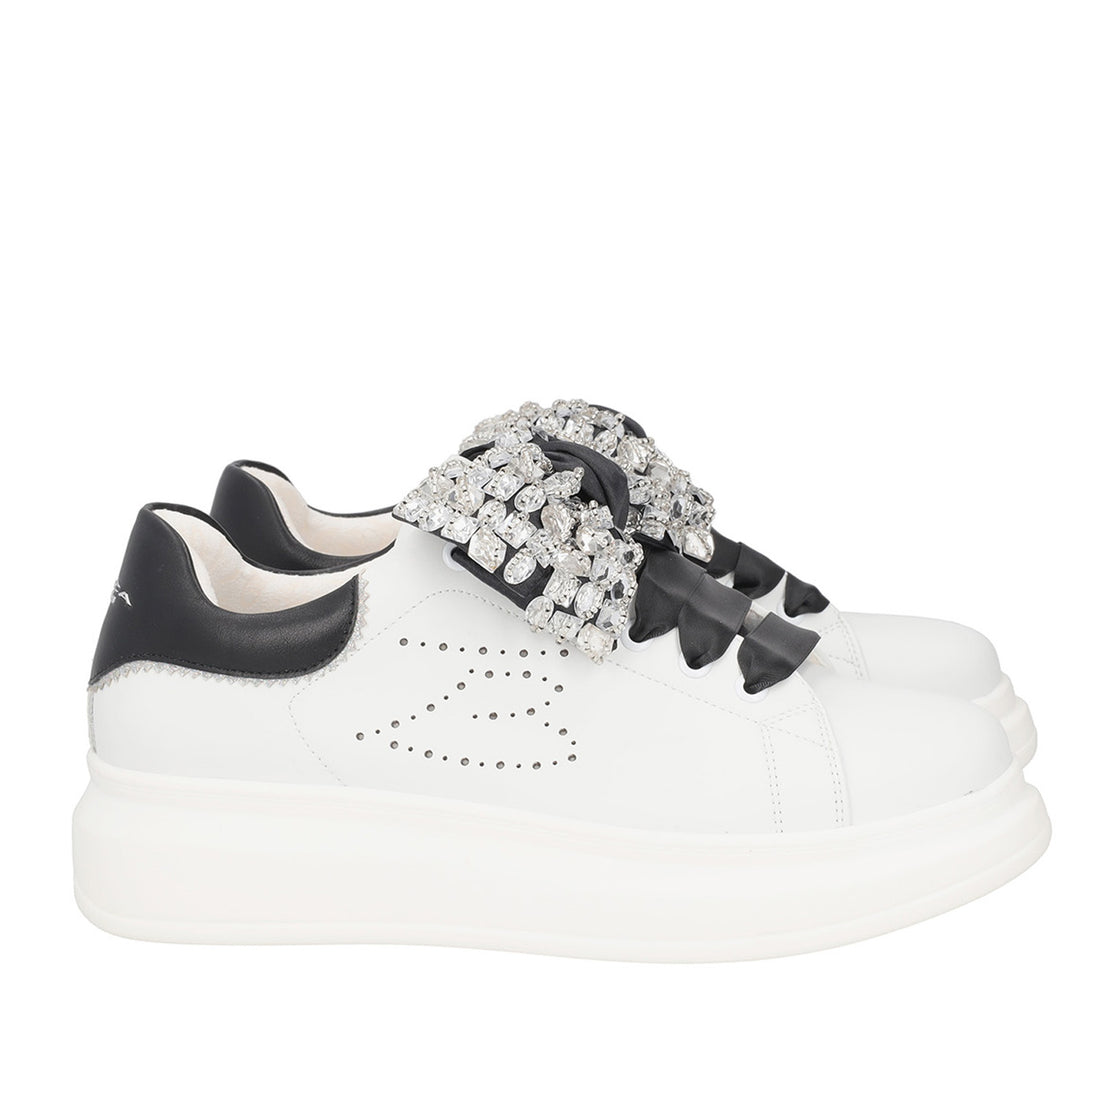 WHITE/BLACK GLAMOUR SNEAKER IN LEATHER WITH RHINESTONE BOW